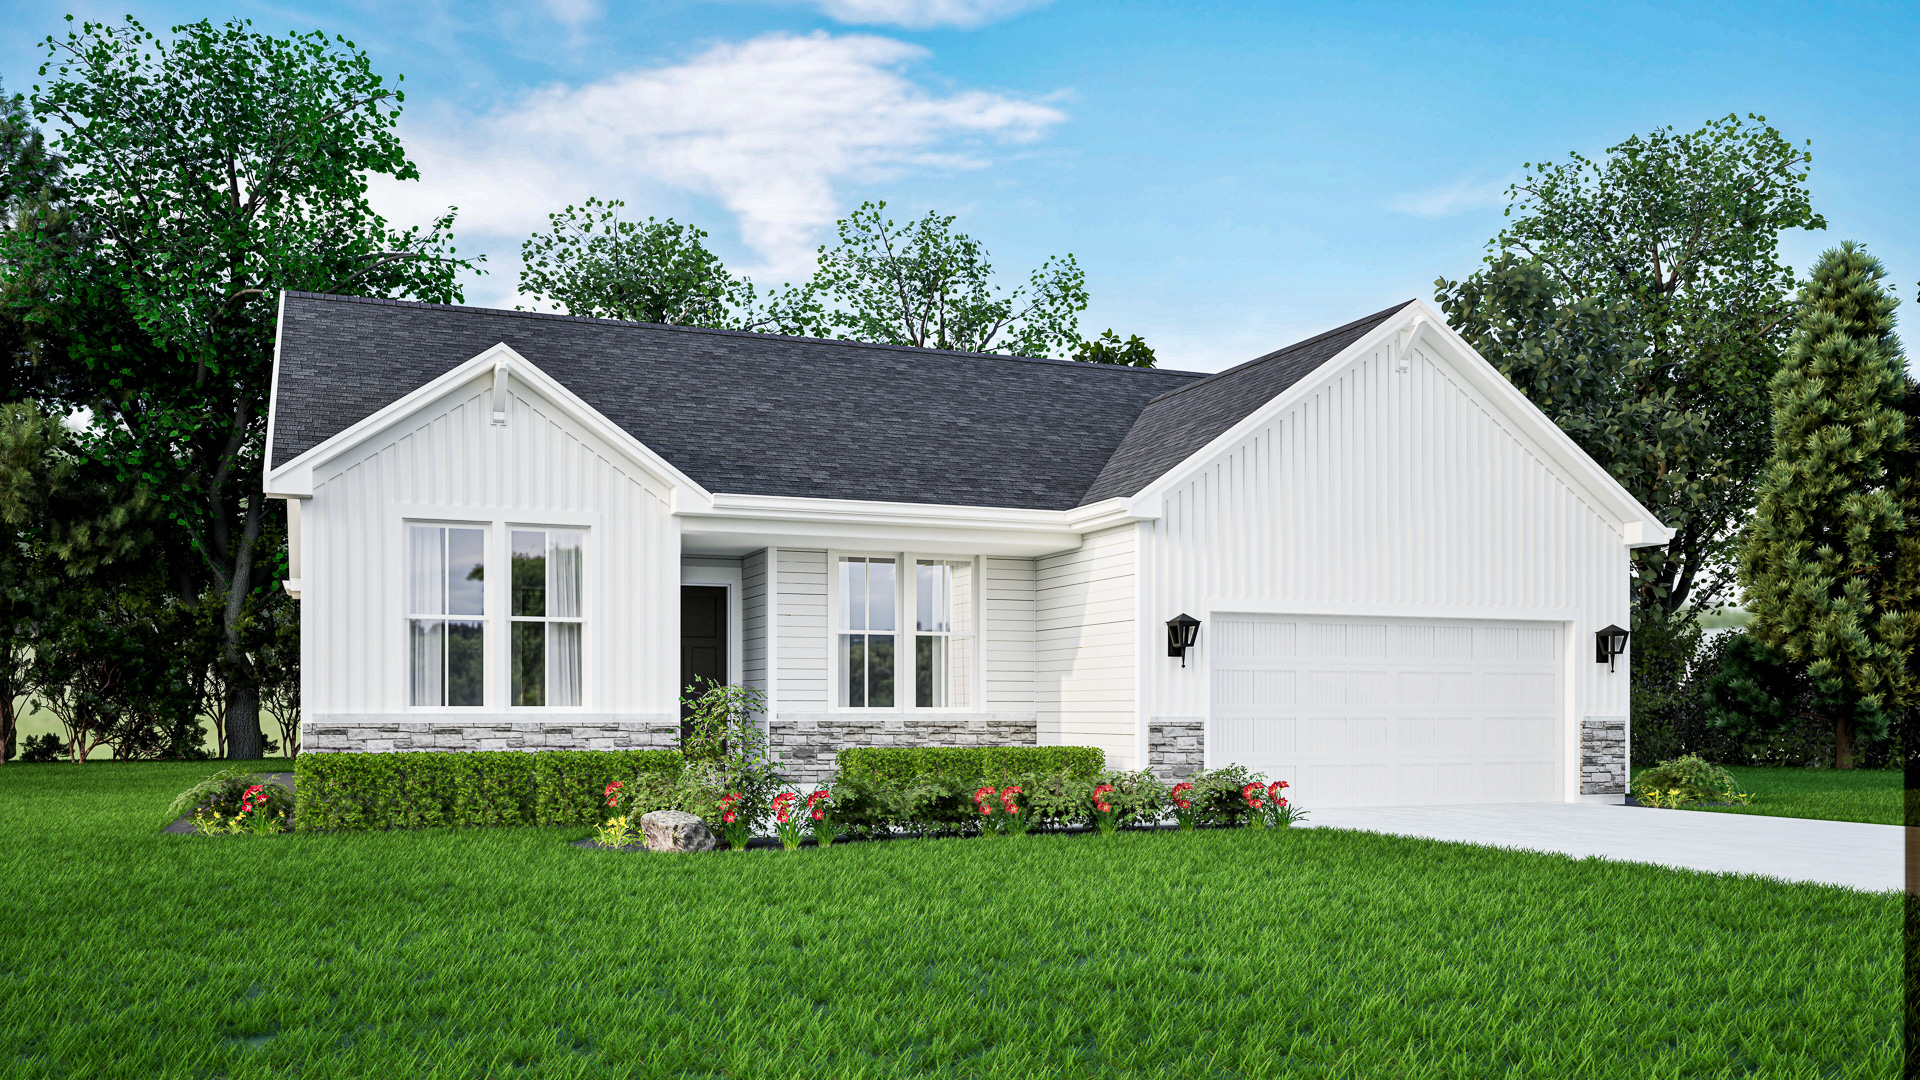 The Ashland Home Model Rendering Stepping Stone Homes